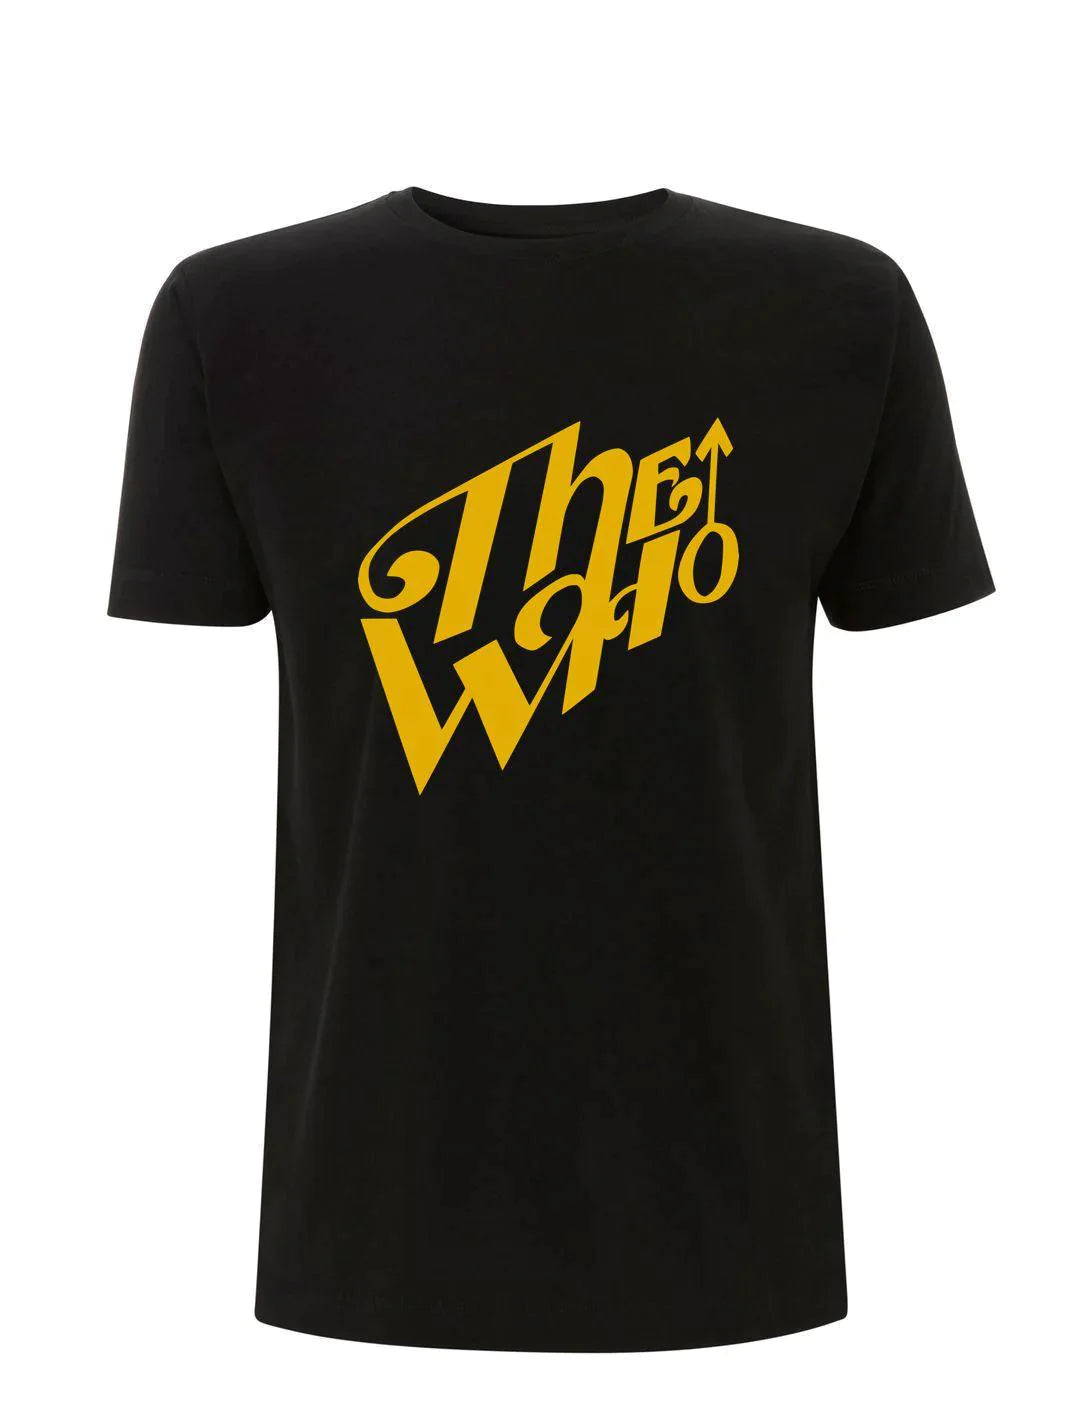 THE WHO: As Worn by John Entwistle (The Who) Several Colours - SOUND IS COLOUR